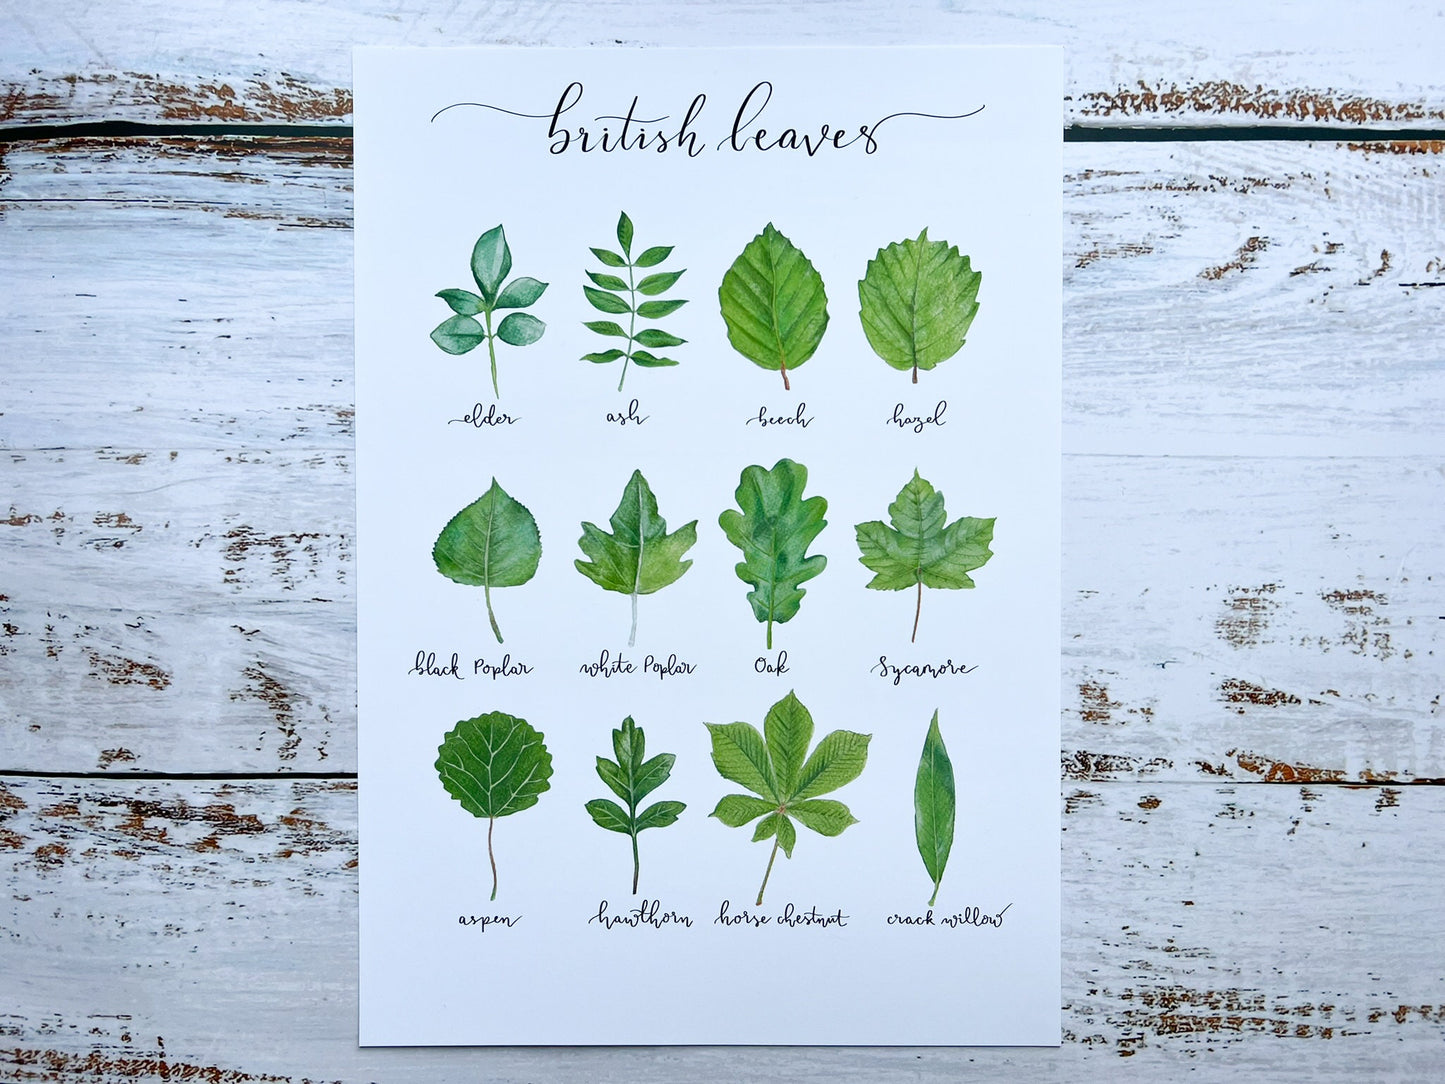 An A4 watercolour print of 12 leaves found on British trees, the name of each leaf is underneath each one